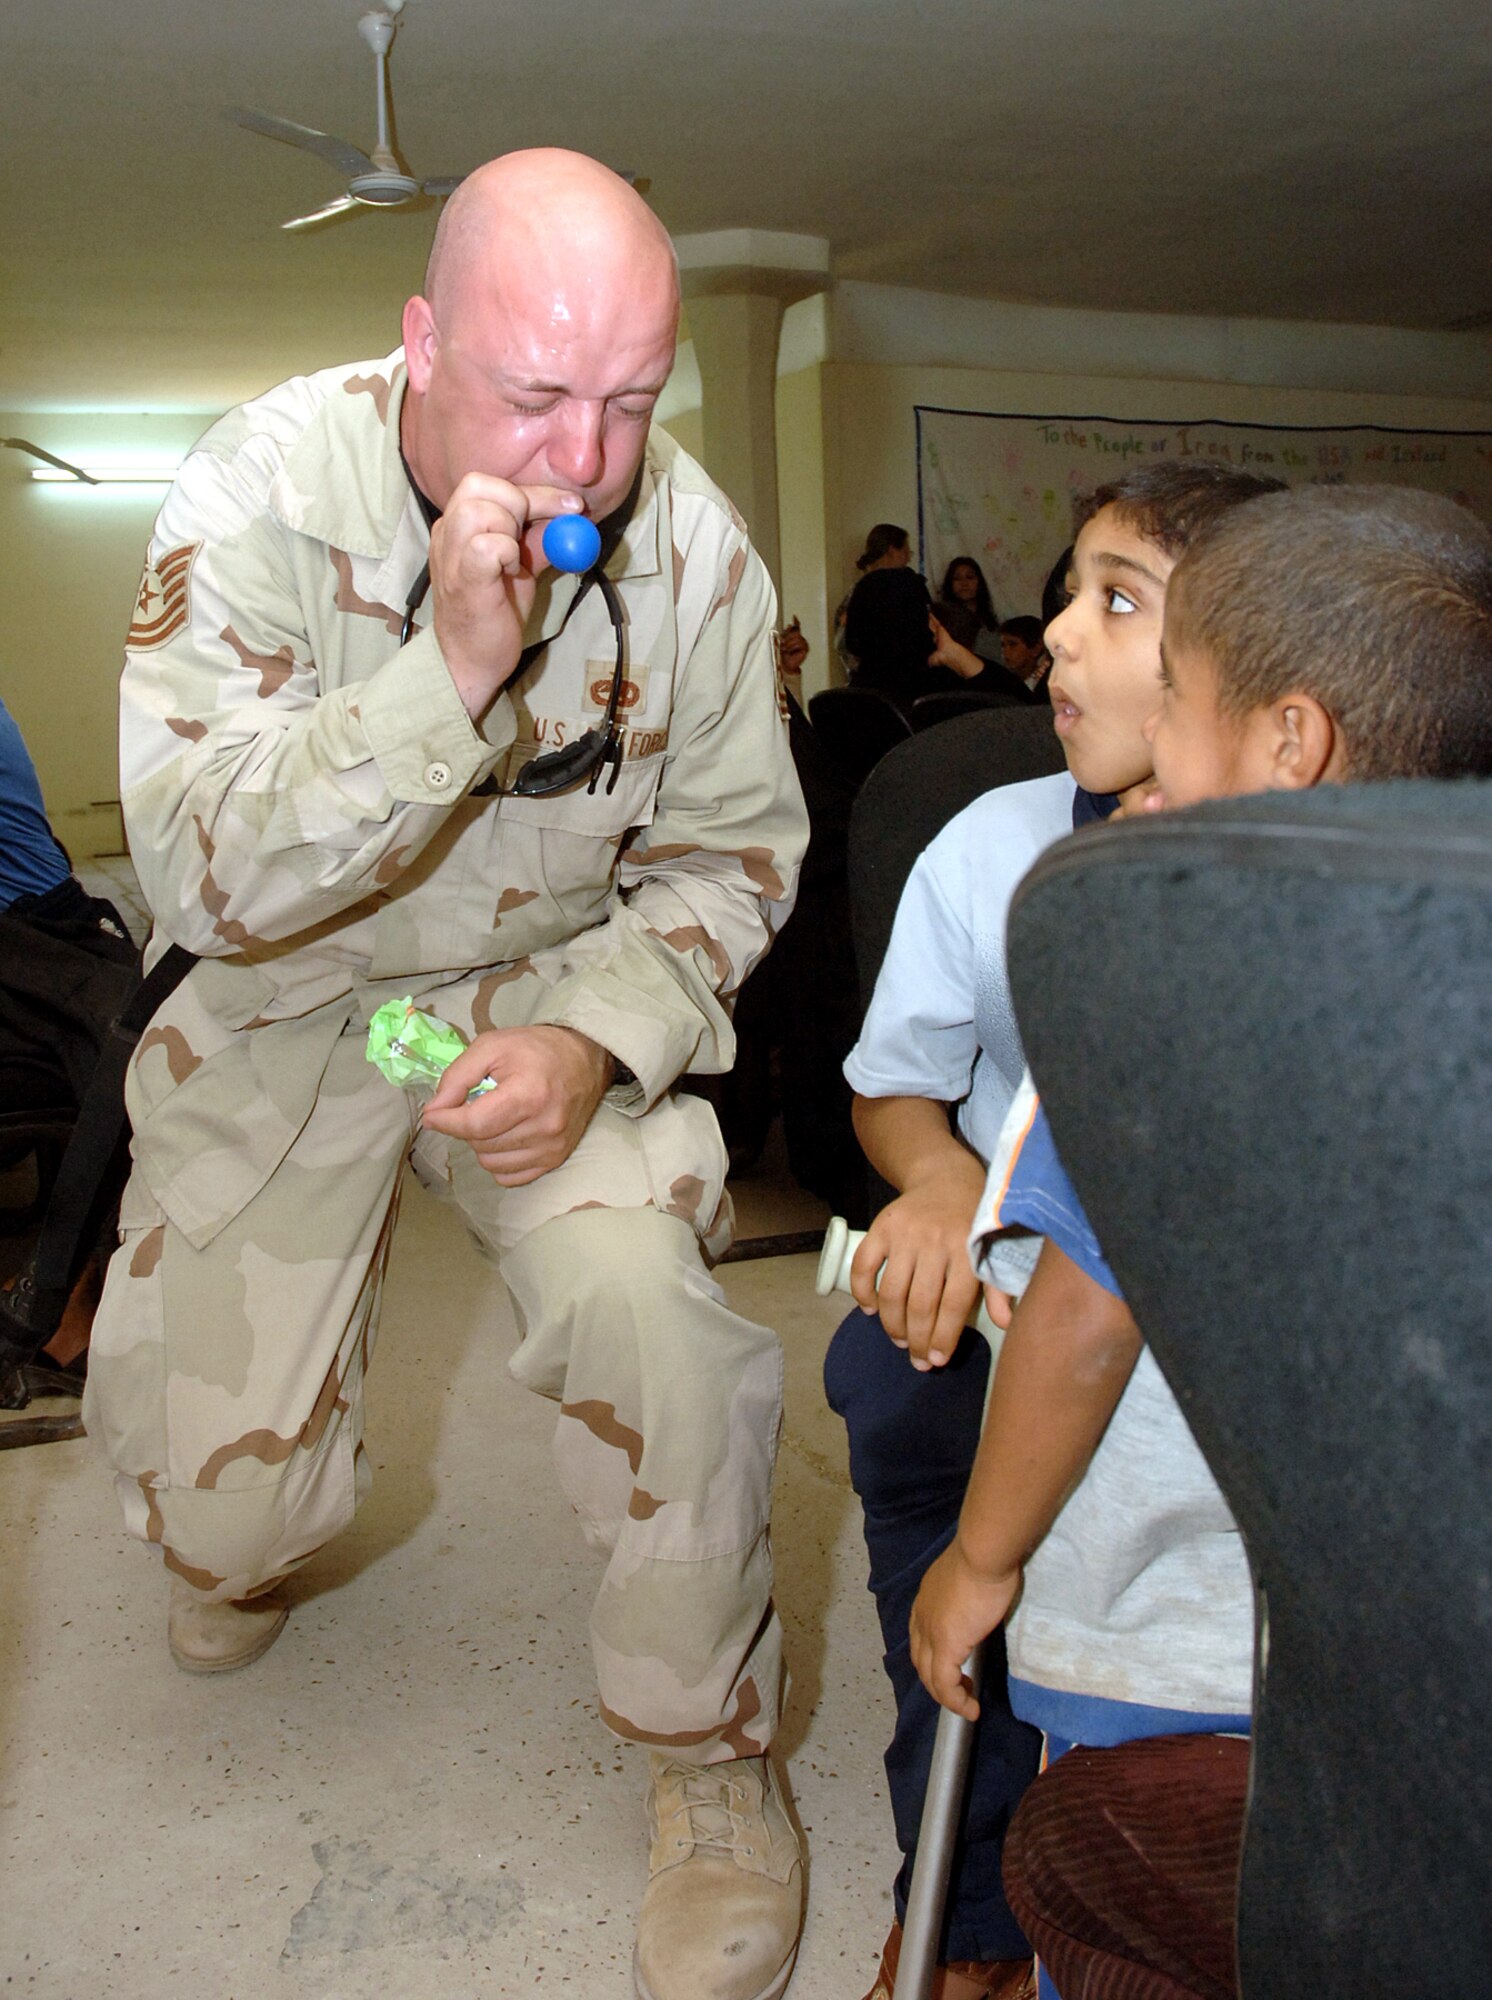 Tech. Sgt. John Carpenter blows up balloons for two Iraqi boys at the Army's Civil Military Operations Center at the Radwinya Palace Complex near Sather Air Base, Iraq, on Saturday, June 3, 2006. Sergeant Carpenter is with the Coalition Military Assistance Transition Team at New Al Muthana Iraqi air base, training Iraqi airmen. (U.S. Air Force photo/Staff Sgt. Bryan Bouchard) 
